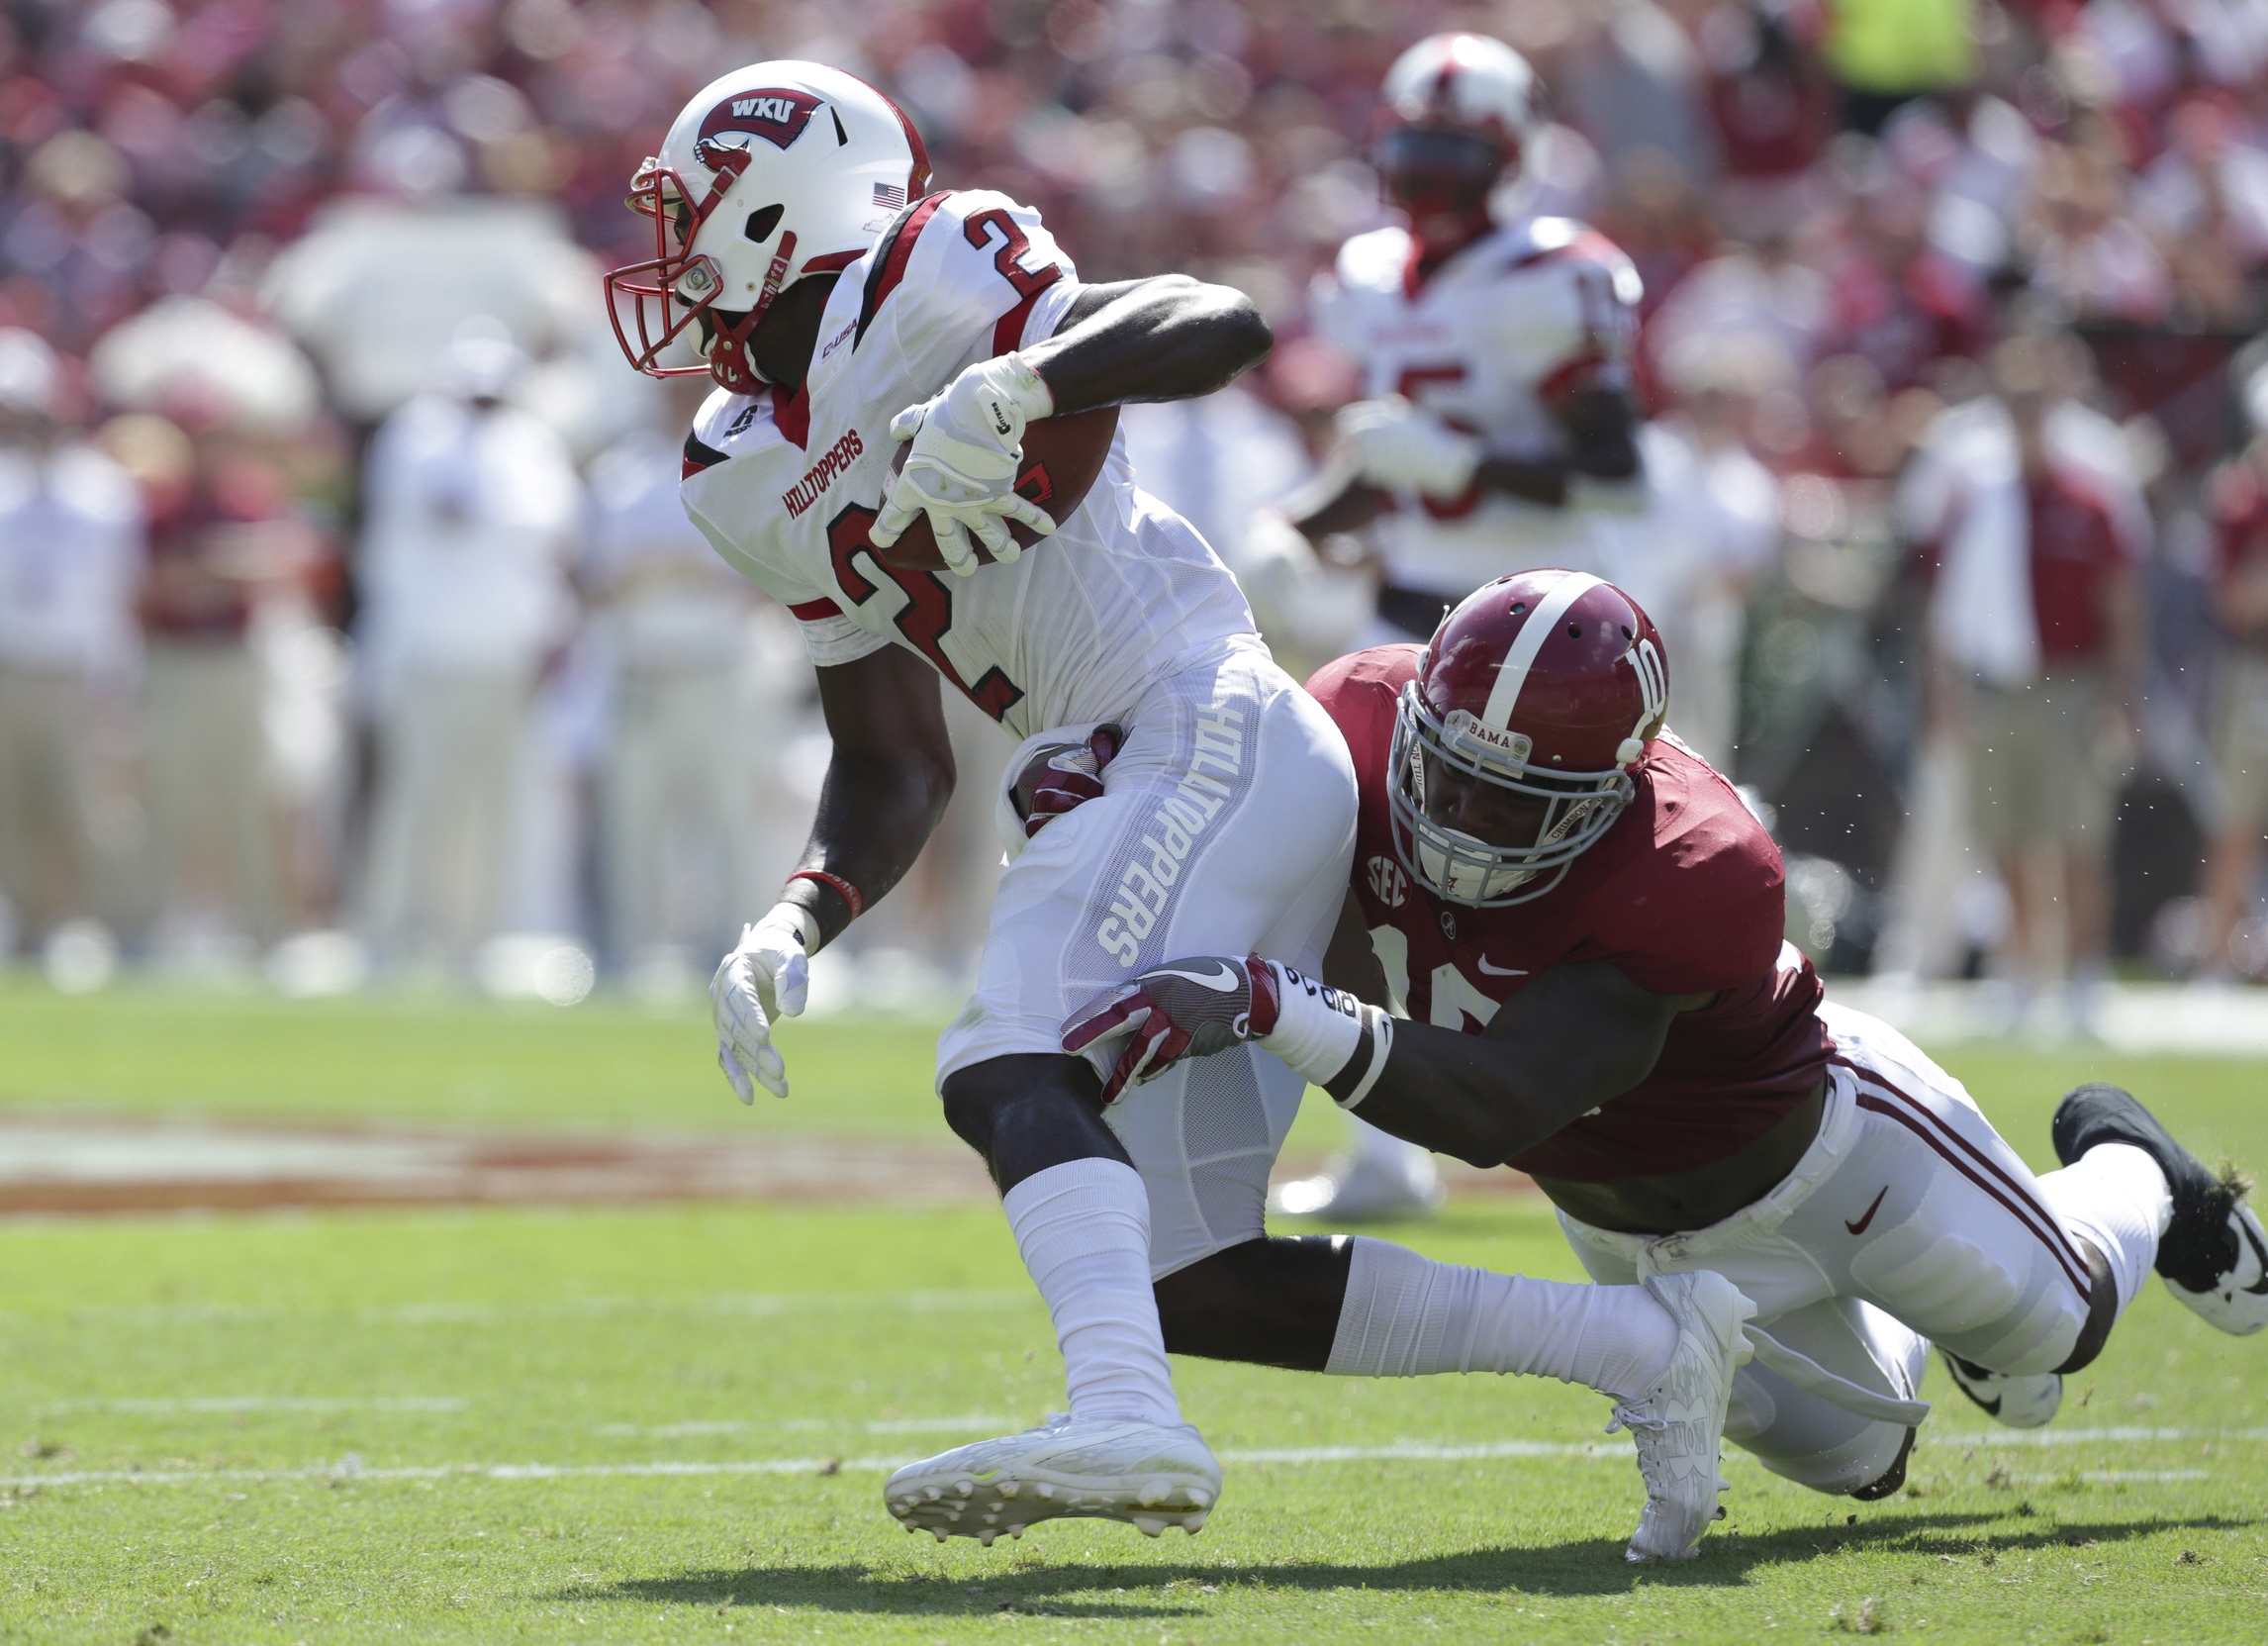 Sep 10, 2016; Tuscaloosa, AL, USA; Western Kentucky Hilltoppers wide receiver Taywan Taylor (2) is tackled by Alabama Crimson Tide linebacker Reuben Foster (10) at Bryant-Denny Stadium. Mandatory Credit: Marvin Gentry-USA TODAY Sports